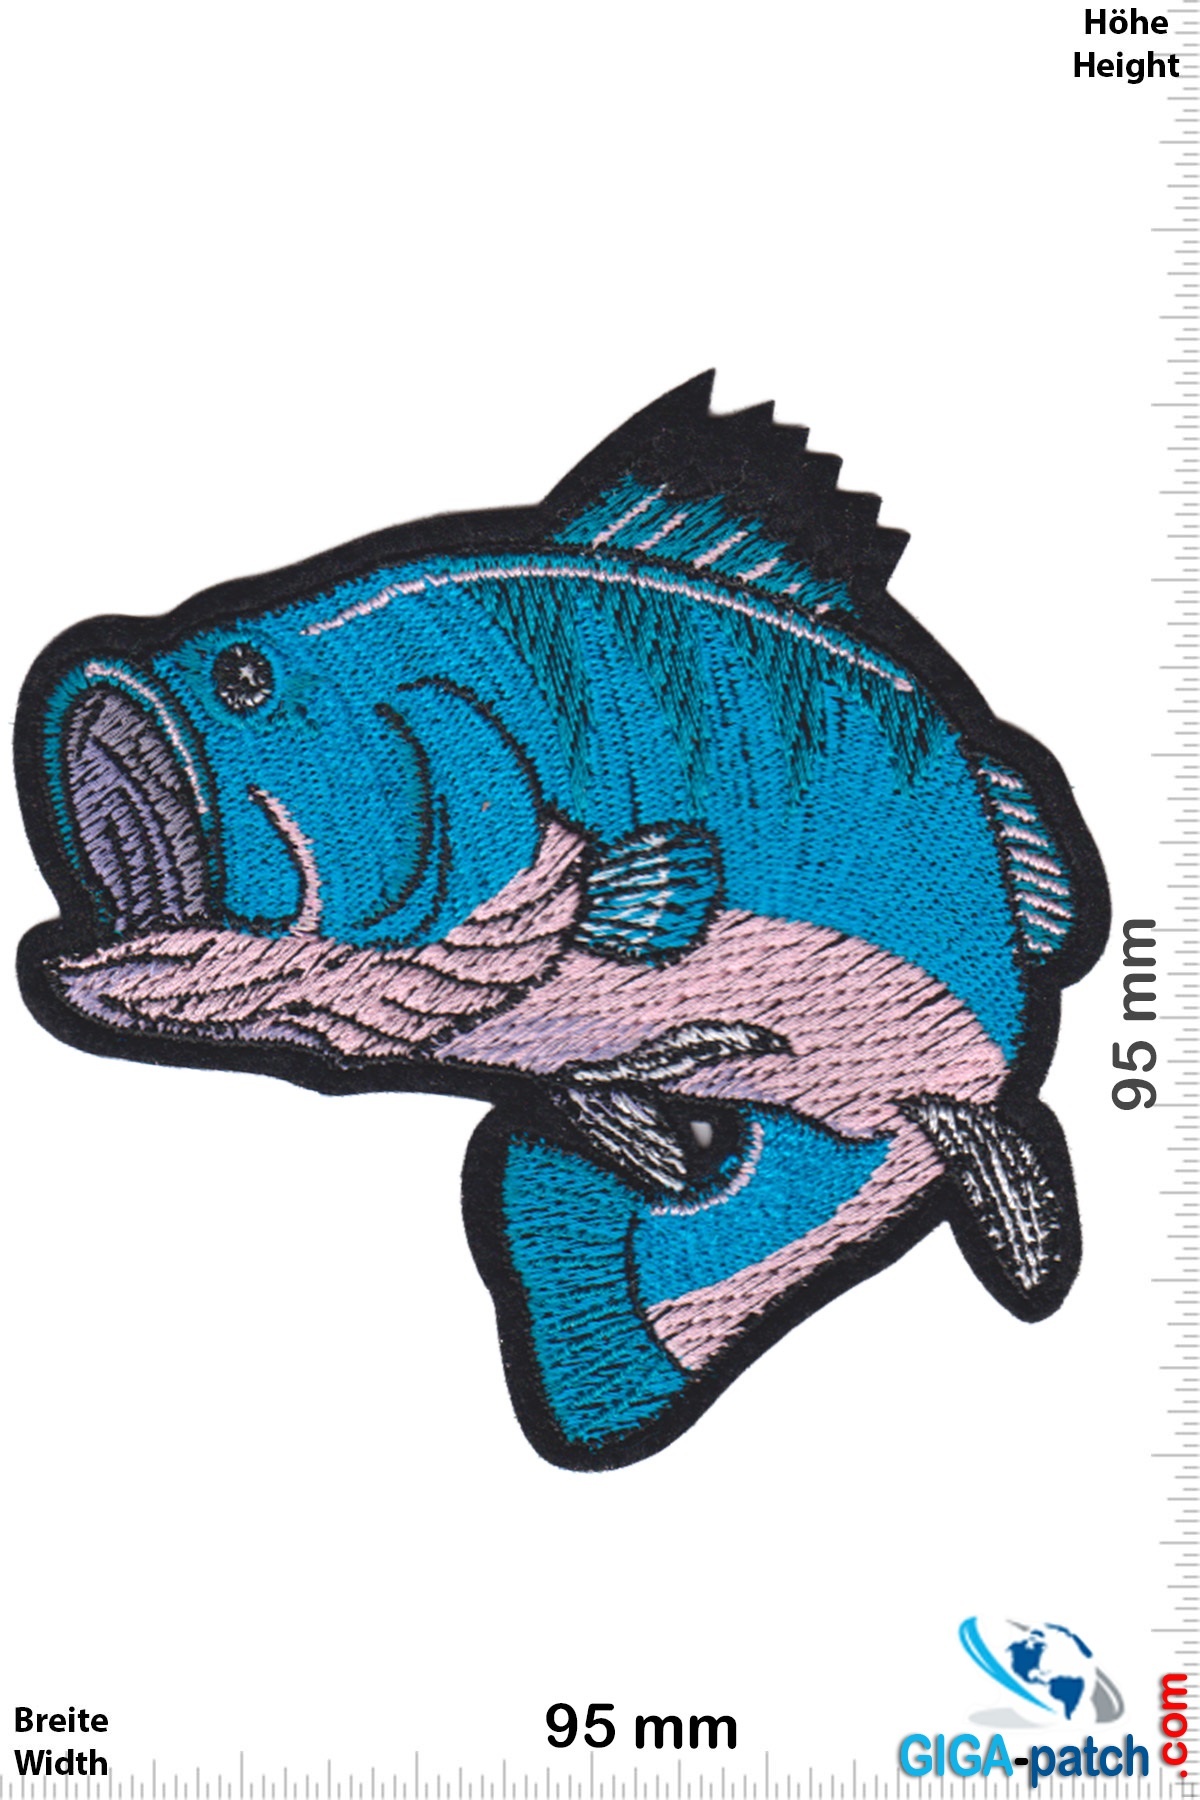 Fisch - Perch - fishing fish - blue- Patch - Back Patches - Patch  Keychains Stickers -  - Biggest Patch Shop worldwide